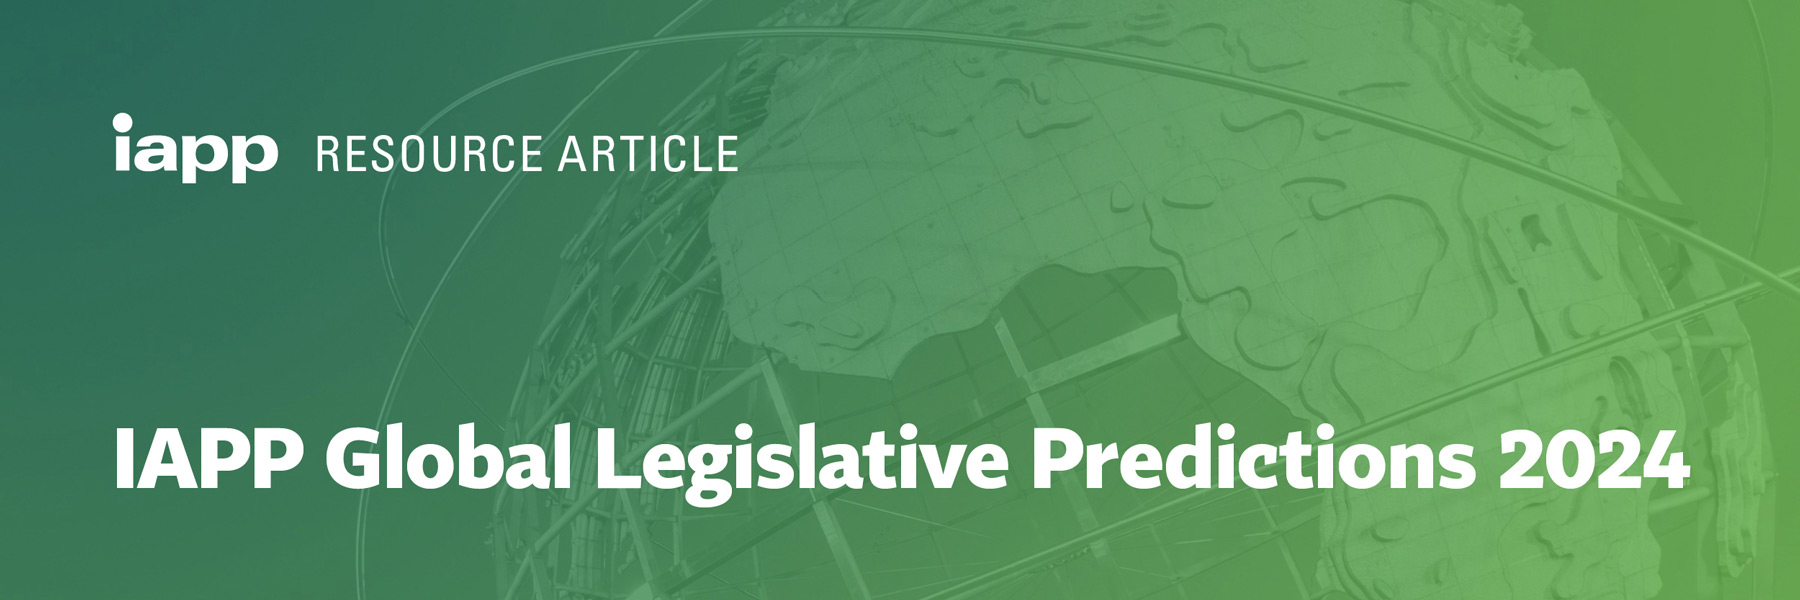 IAPP released Global Legislative Predictions 2024 and our Co-Founder shares his views